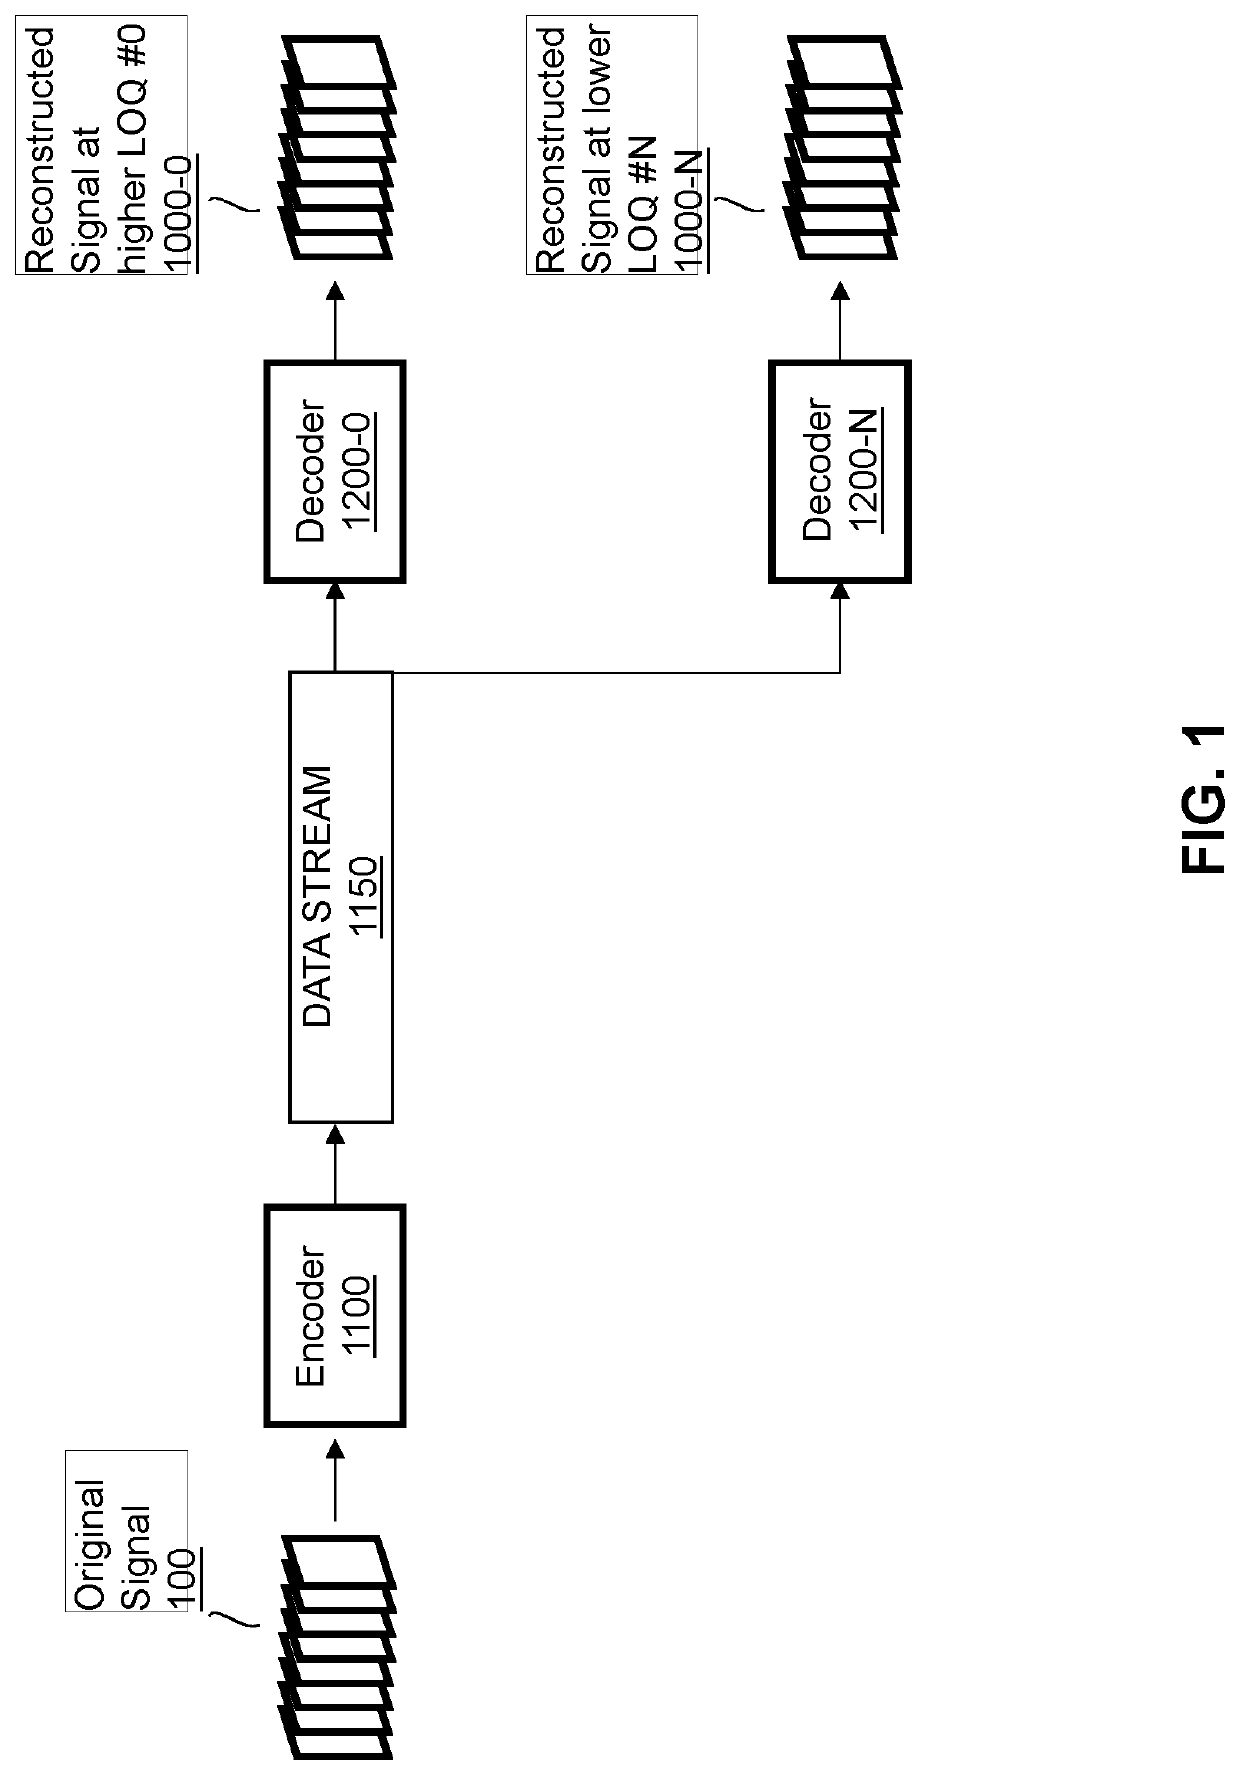 Enhancement decoder for video signals with multi-level enhancement and coding format adjustment